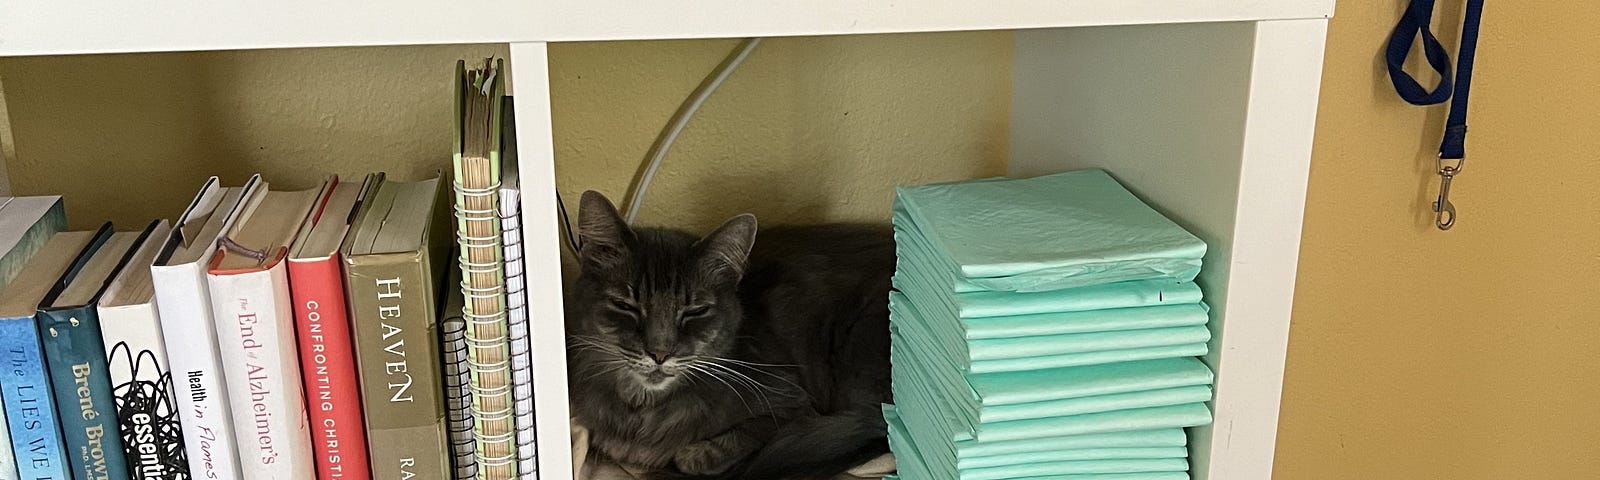 gray cat lounging in a cubby of a bookcase